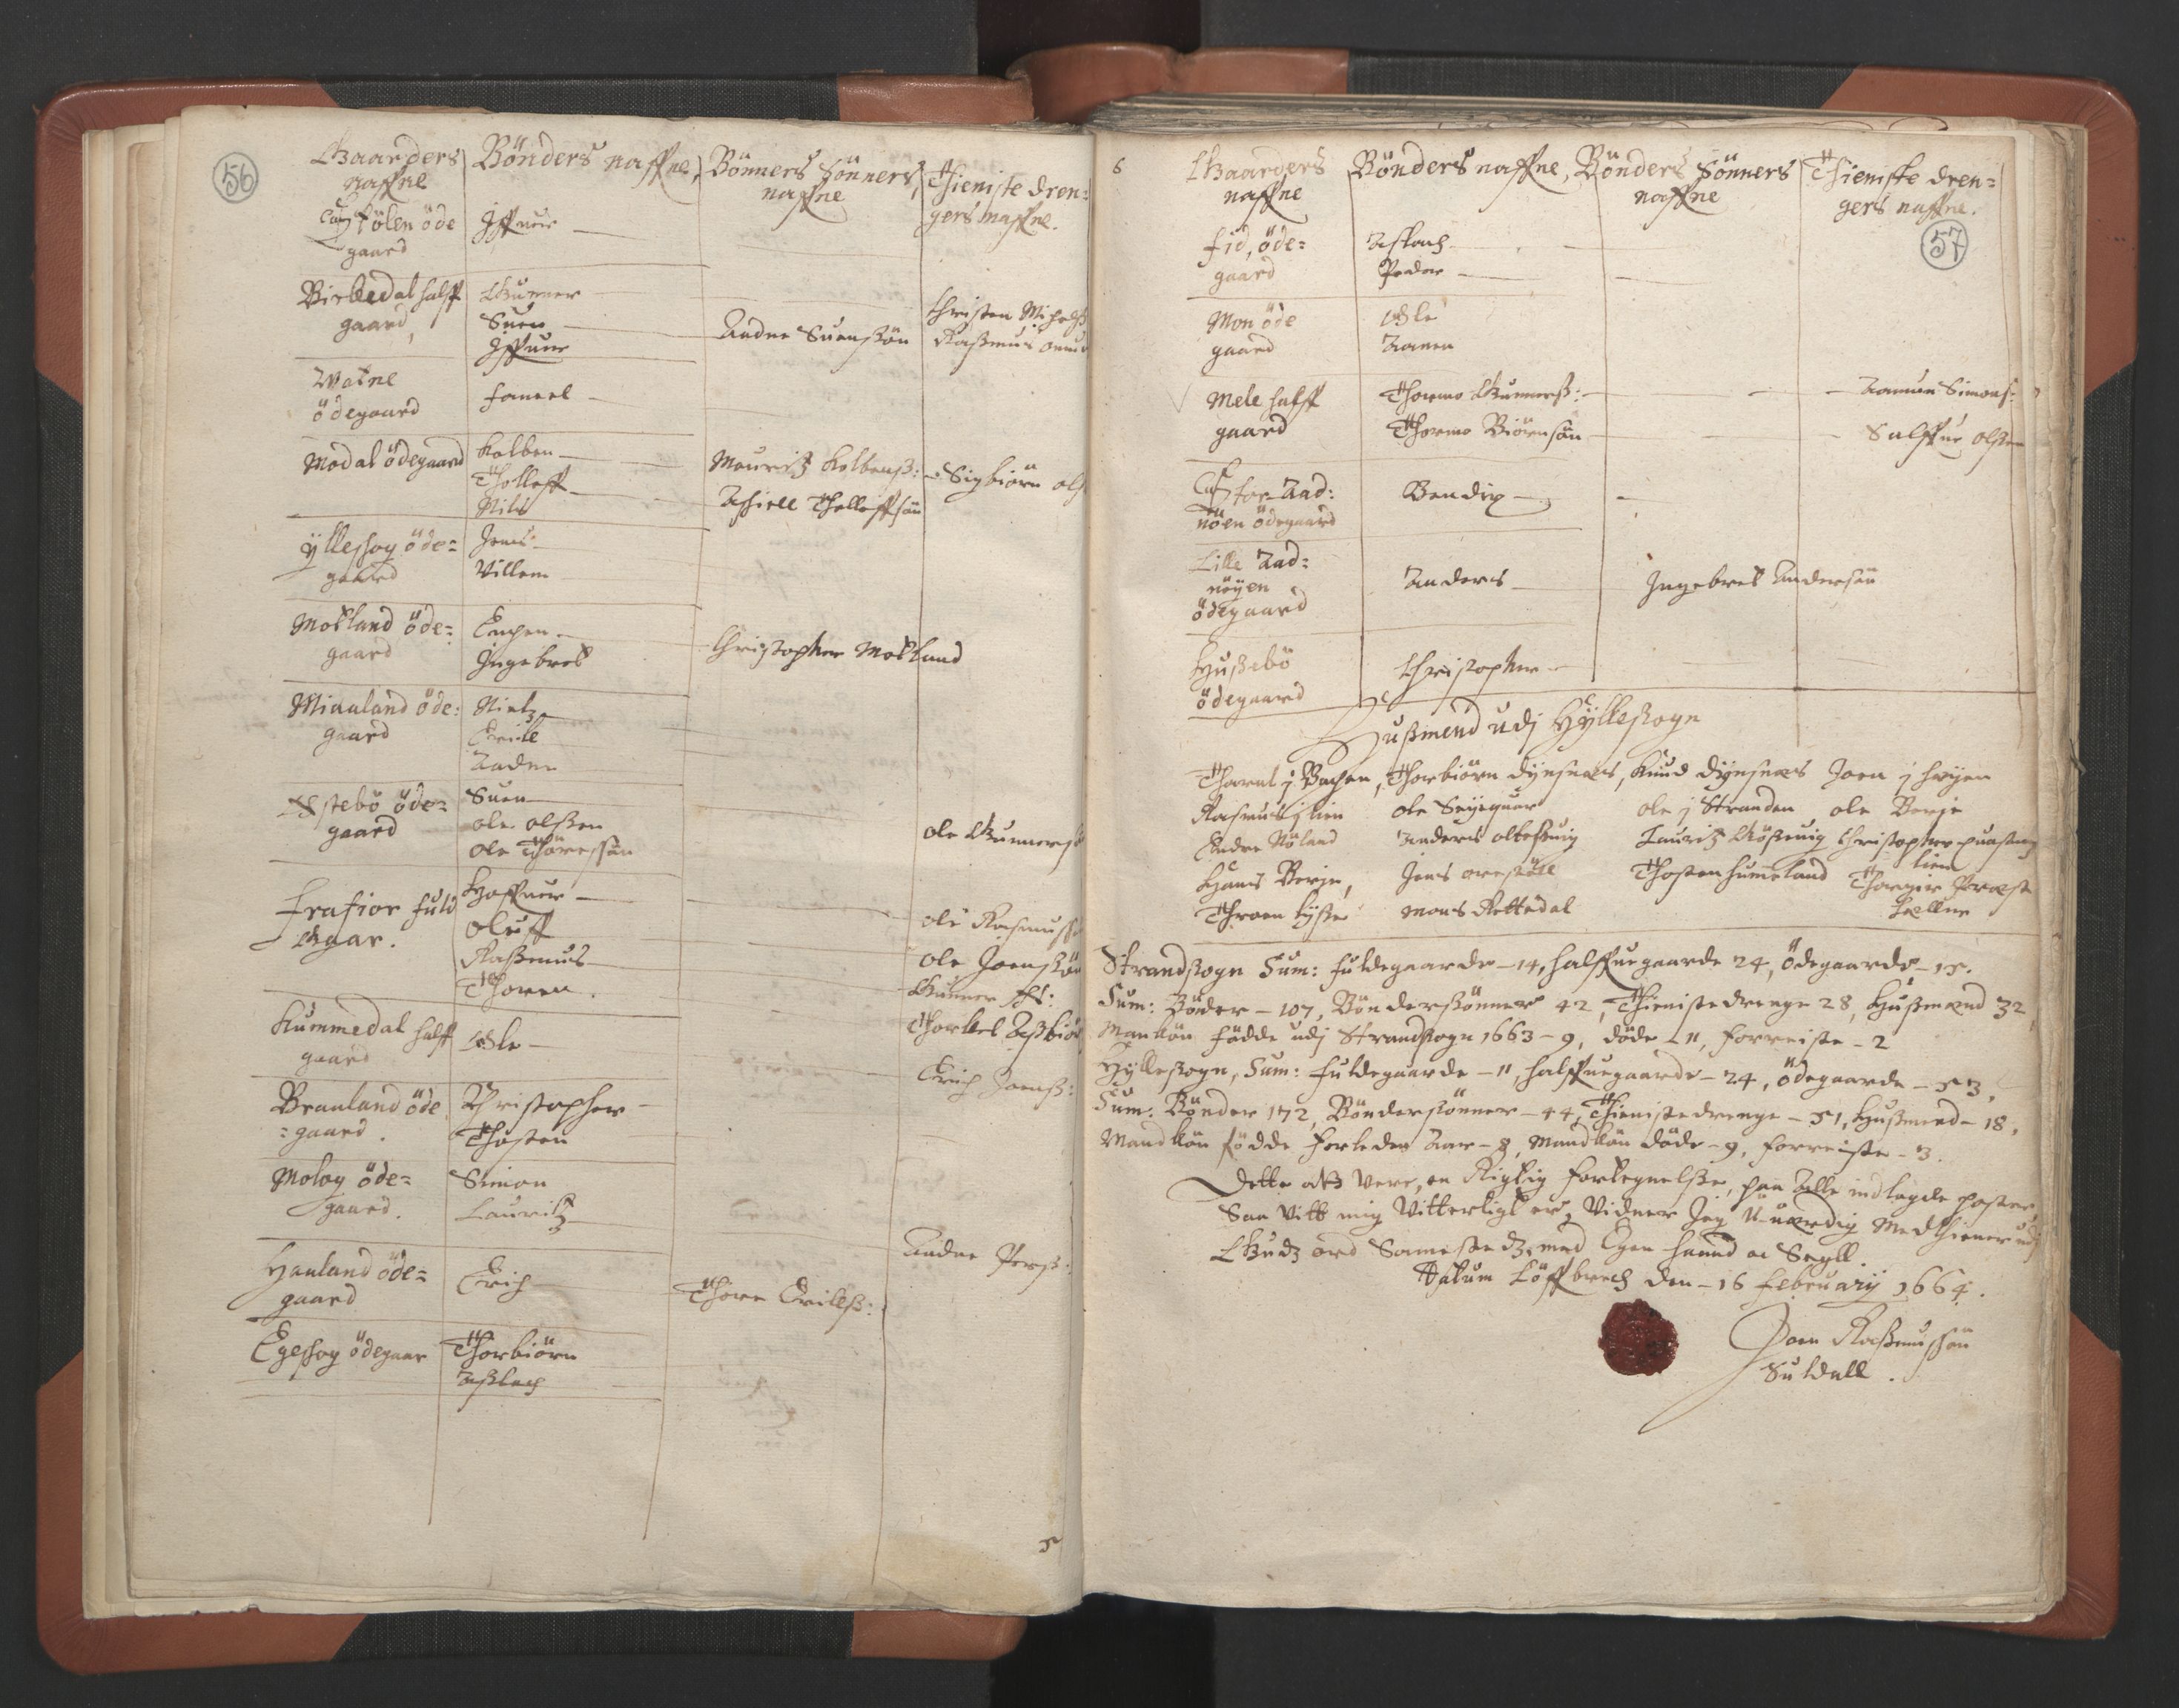 RA, Vicar's Census 1664-1666, no. 18: Stavanger deanery and Karmsund deanery, 1664-1666, p. 56-57